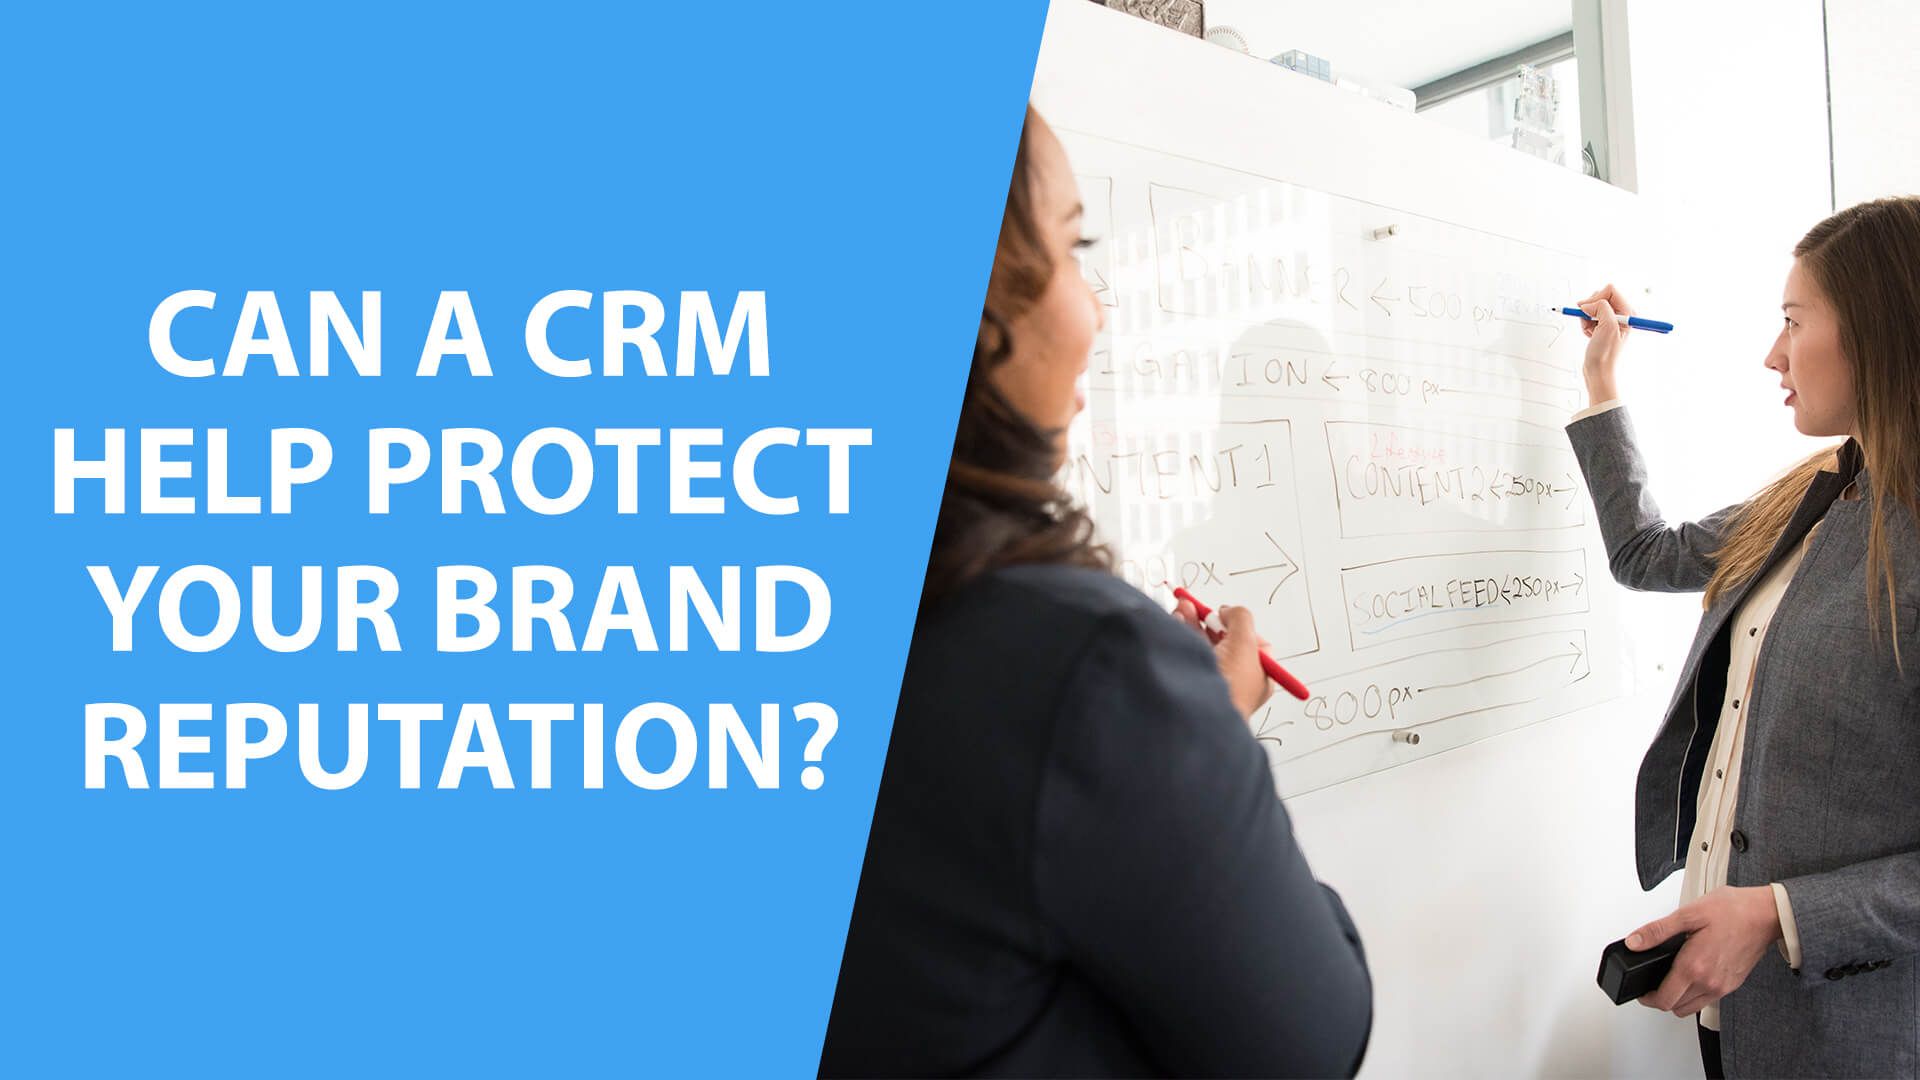 Can a CRM Help Protect Your Brand Reputation?